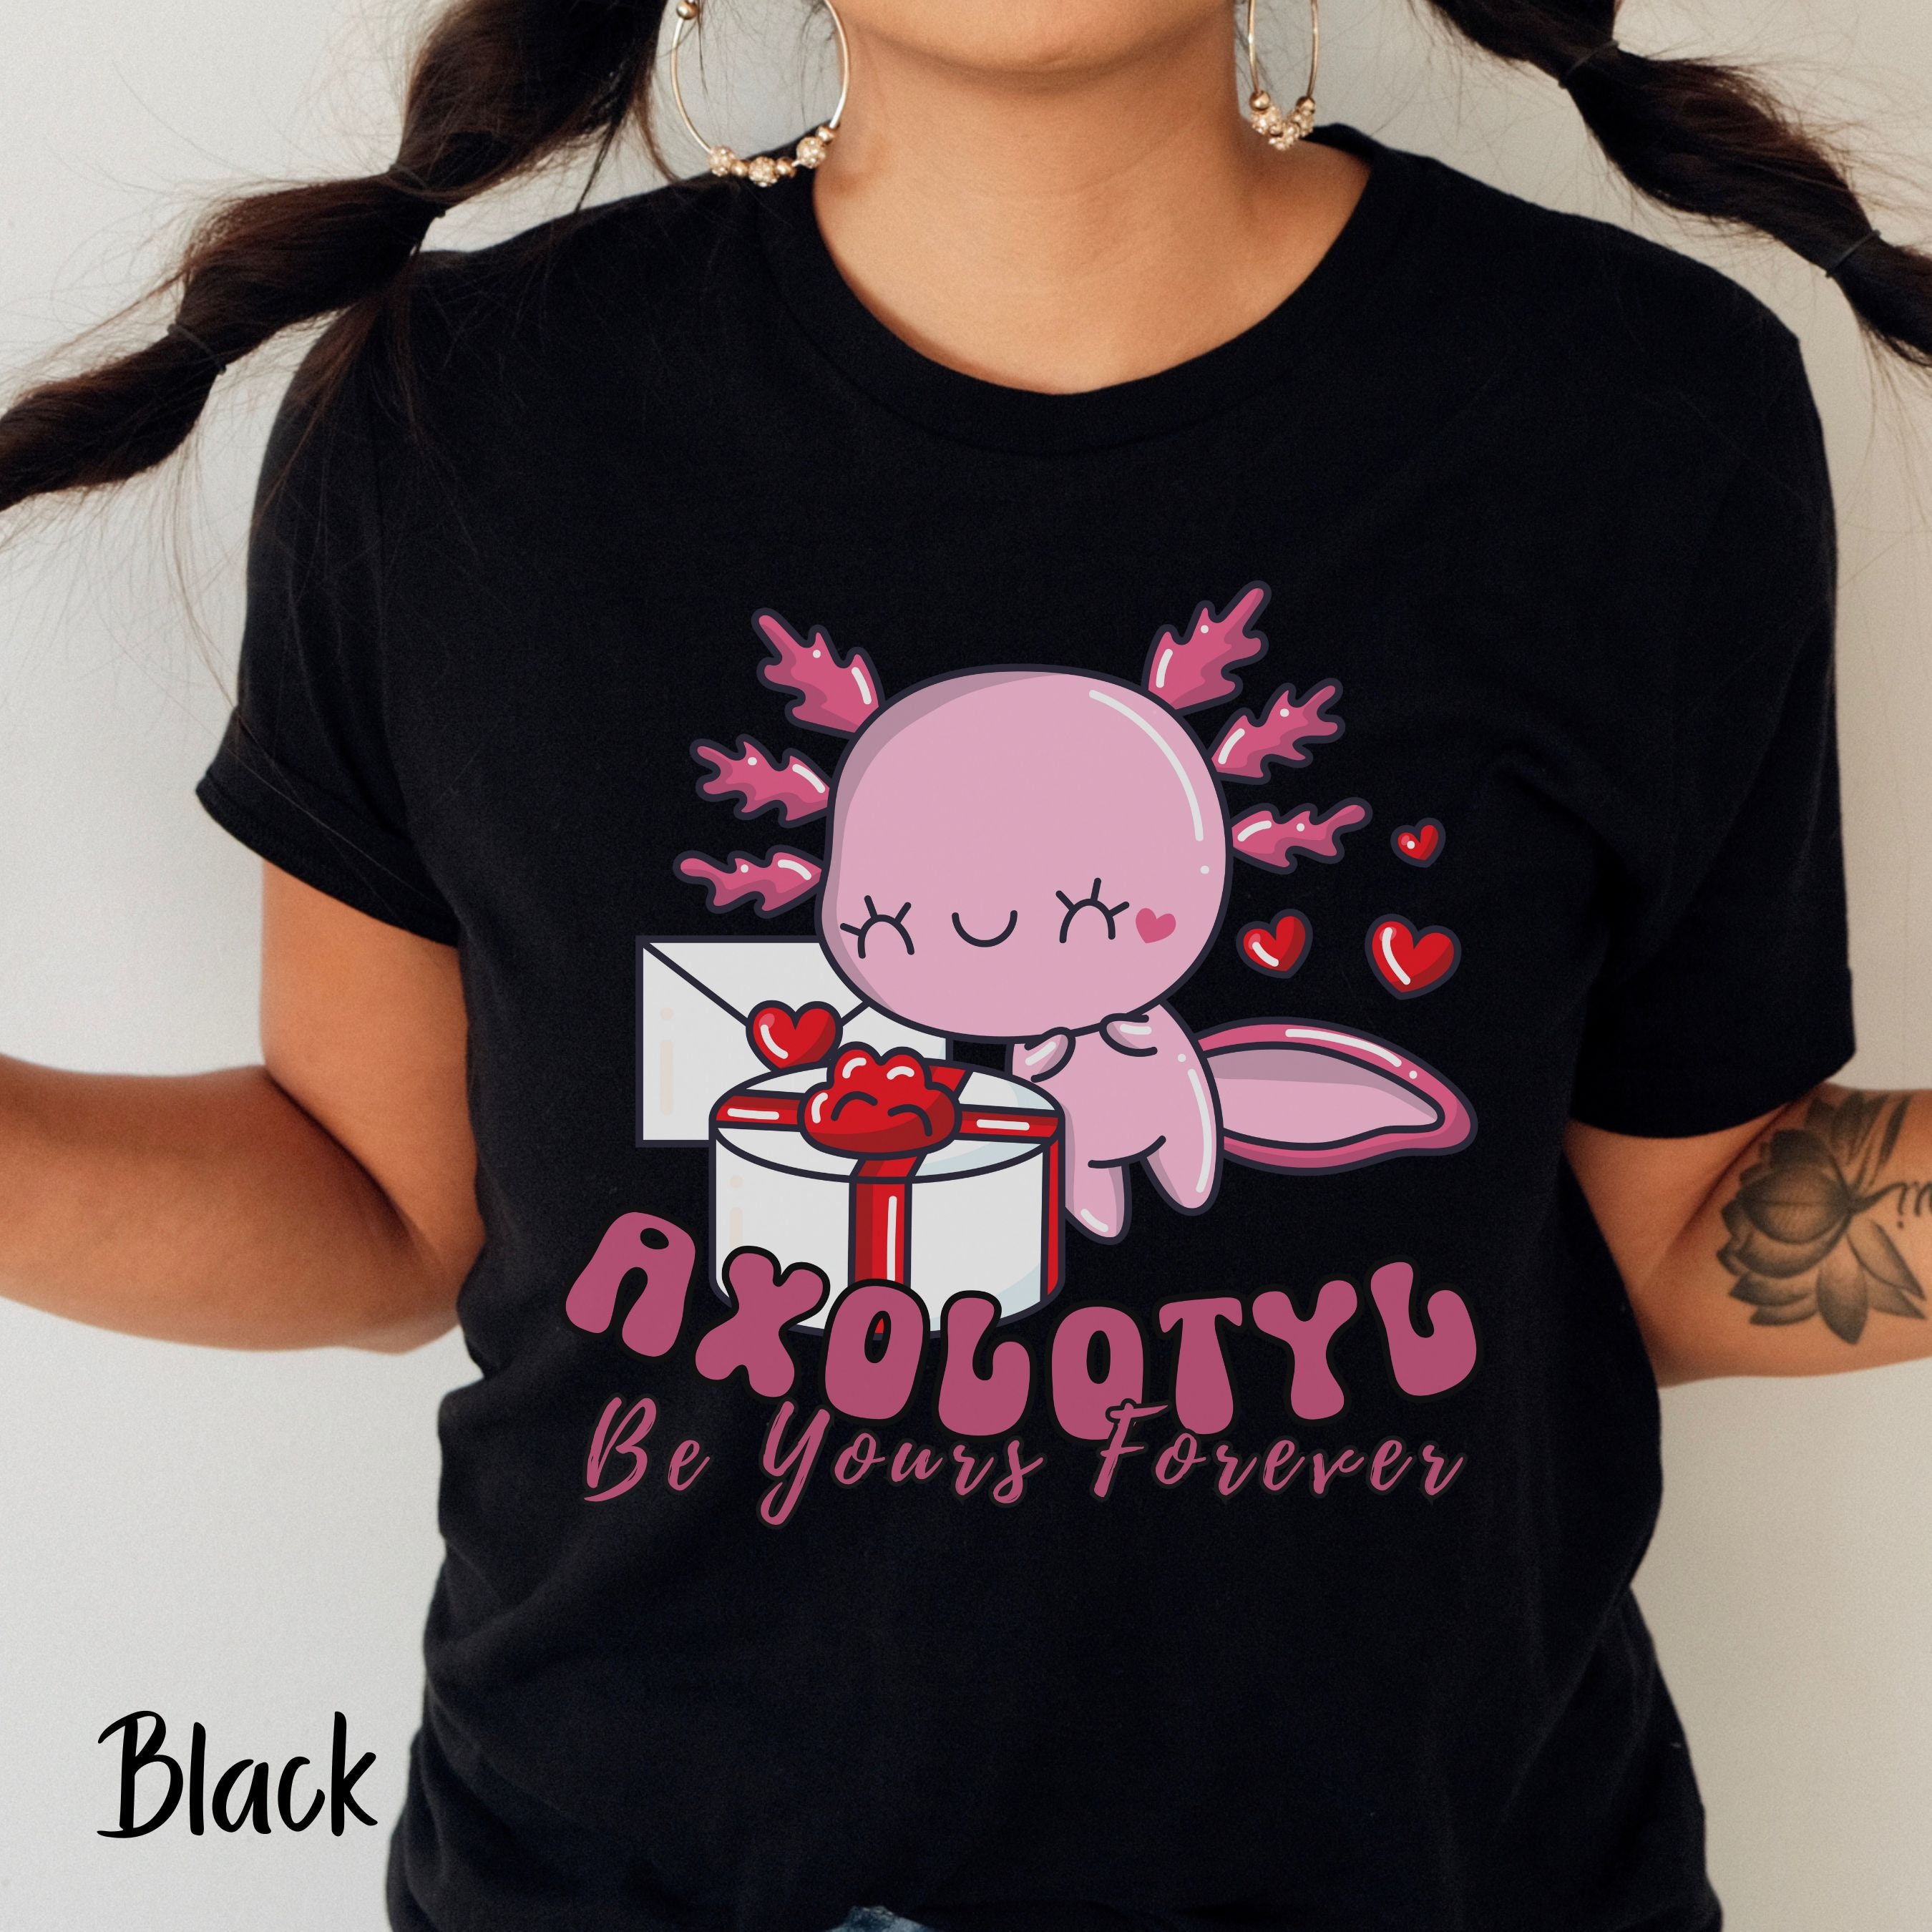 Just A Girl Who Loves Anime Shirt Otaku Clothing Gifts for Teen